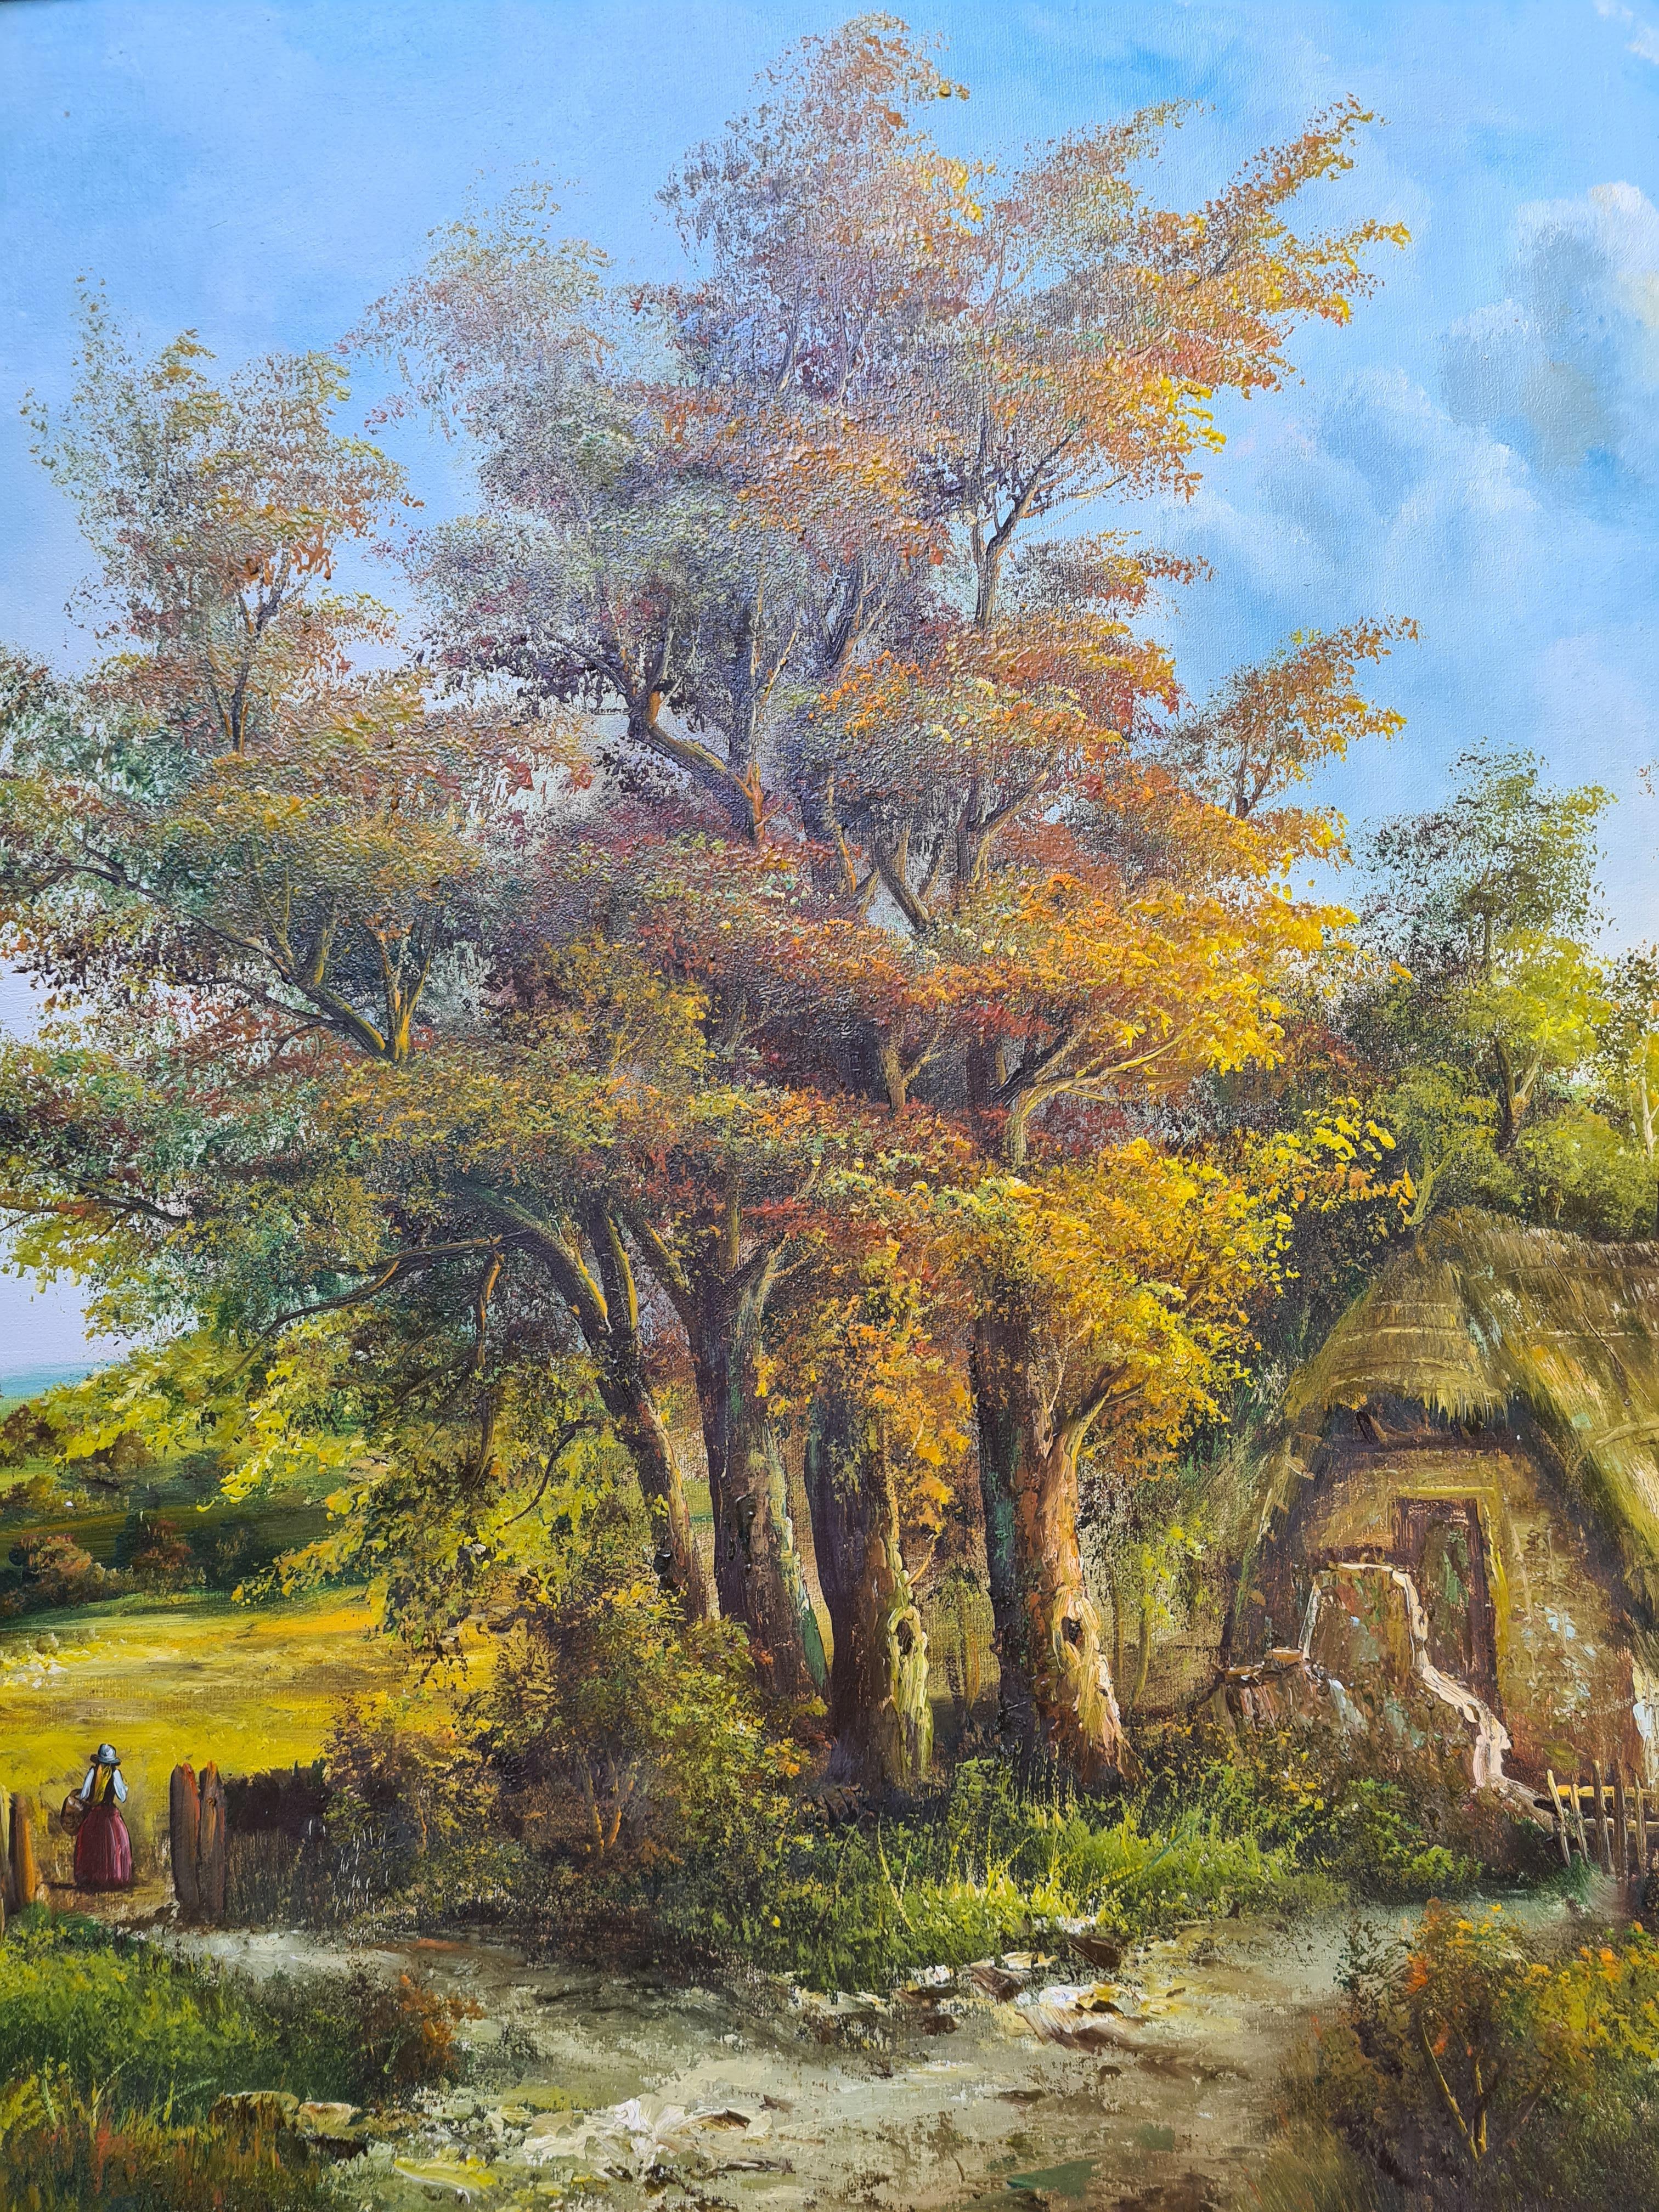 A large scale oil on canvas landscape painting of a thatched cottage with a far view to a church spire beyond a lake by Percy. The painting is signed bottom right and is presented in a plain wood frame.

Percy has created a charming and idealistic